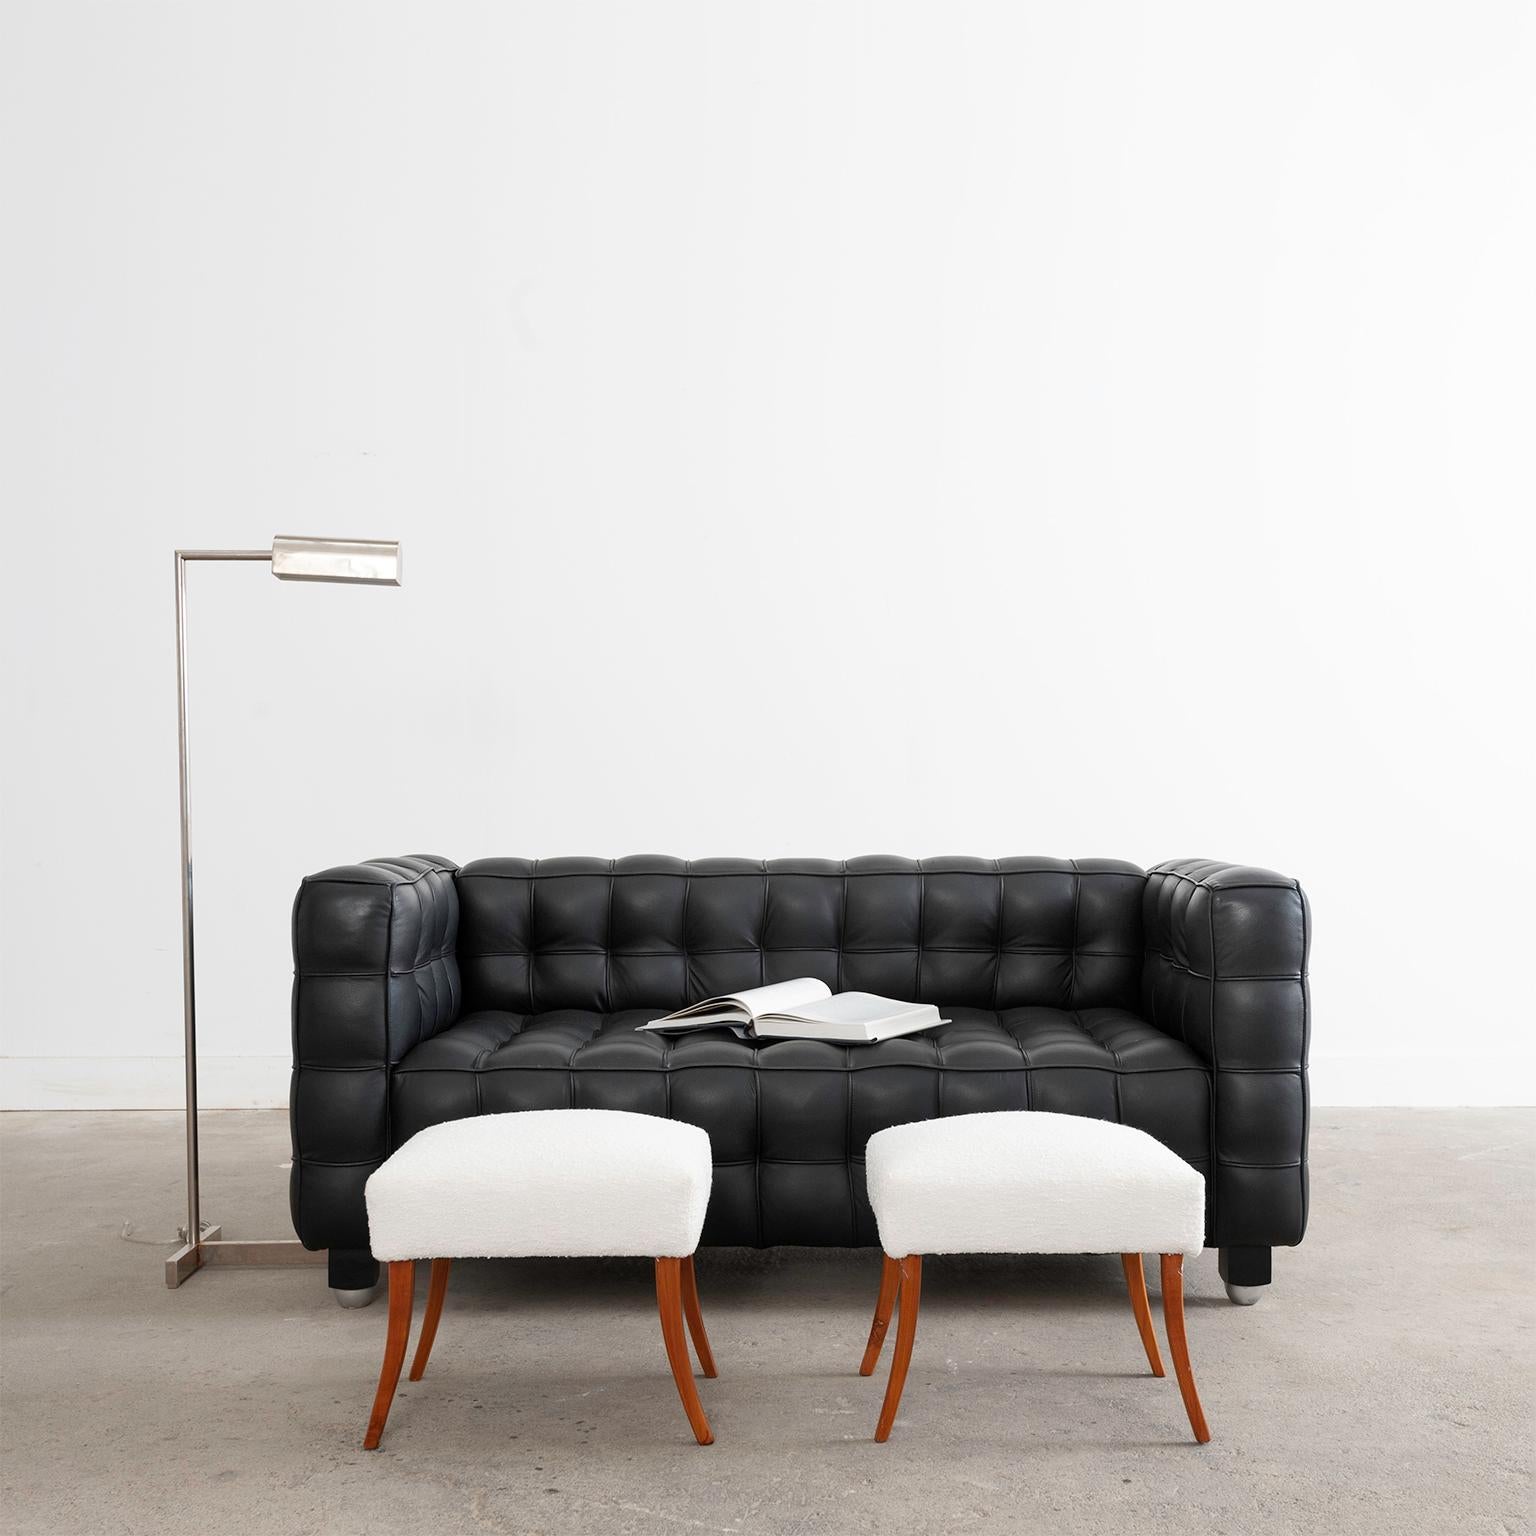 Dramatic modern sofa or settee attributed to Josef Hoffmann for Wittmann, Austria. The geometric cube motif sofa features soft black leather seating surfaces fitted like a fine Italian suit. Excellent joinery and craftsmanship with a lightly aged